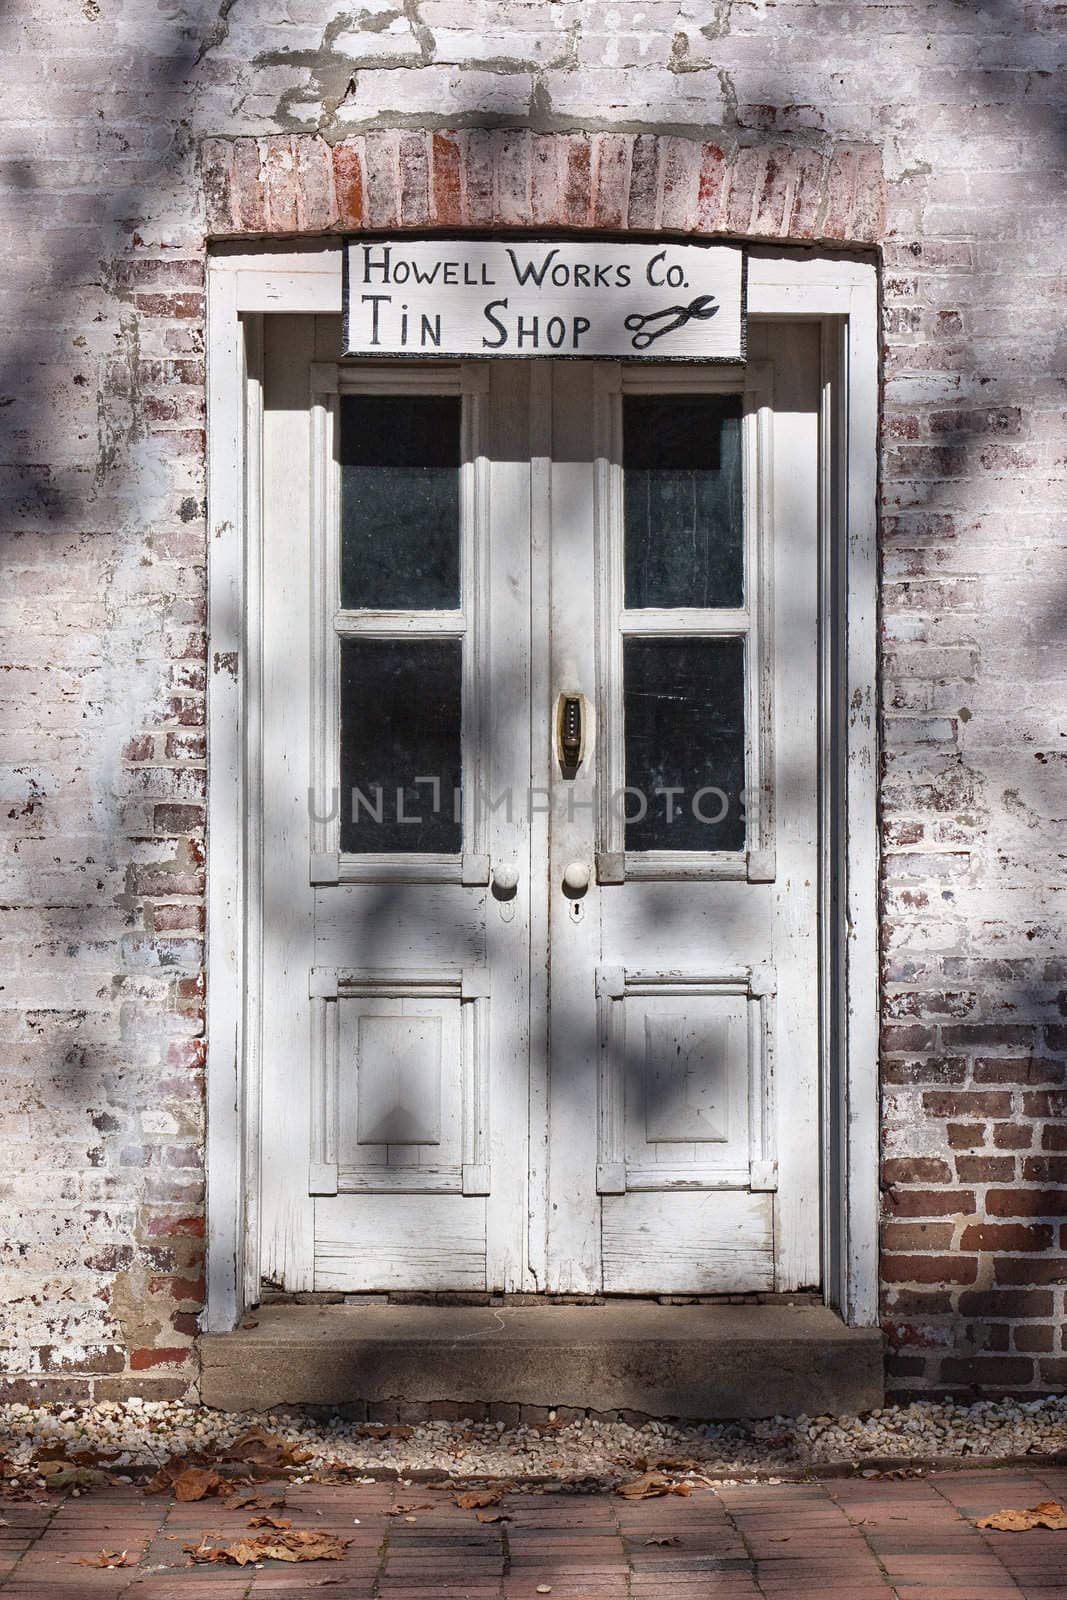 Tin Shop in Allaire Village by sbonk